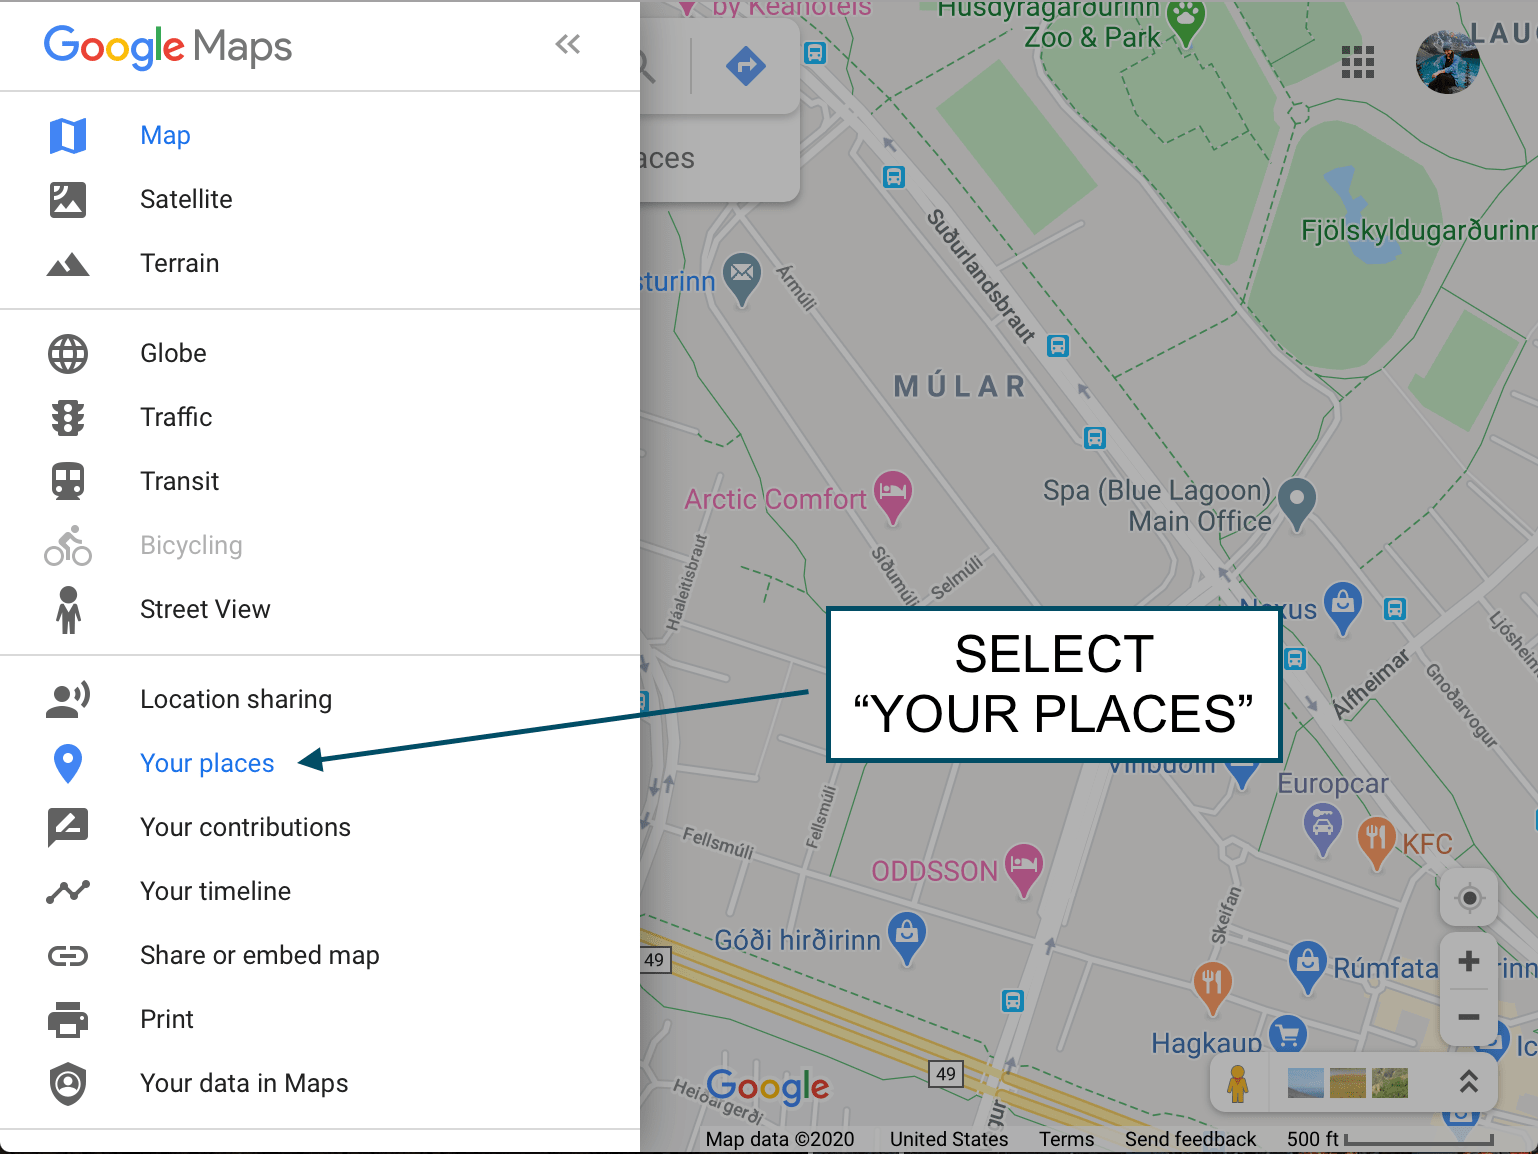 How to find your custom map in Google Maps